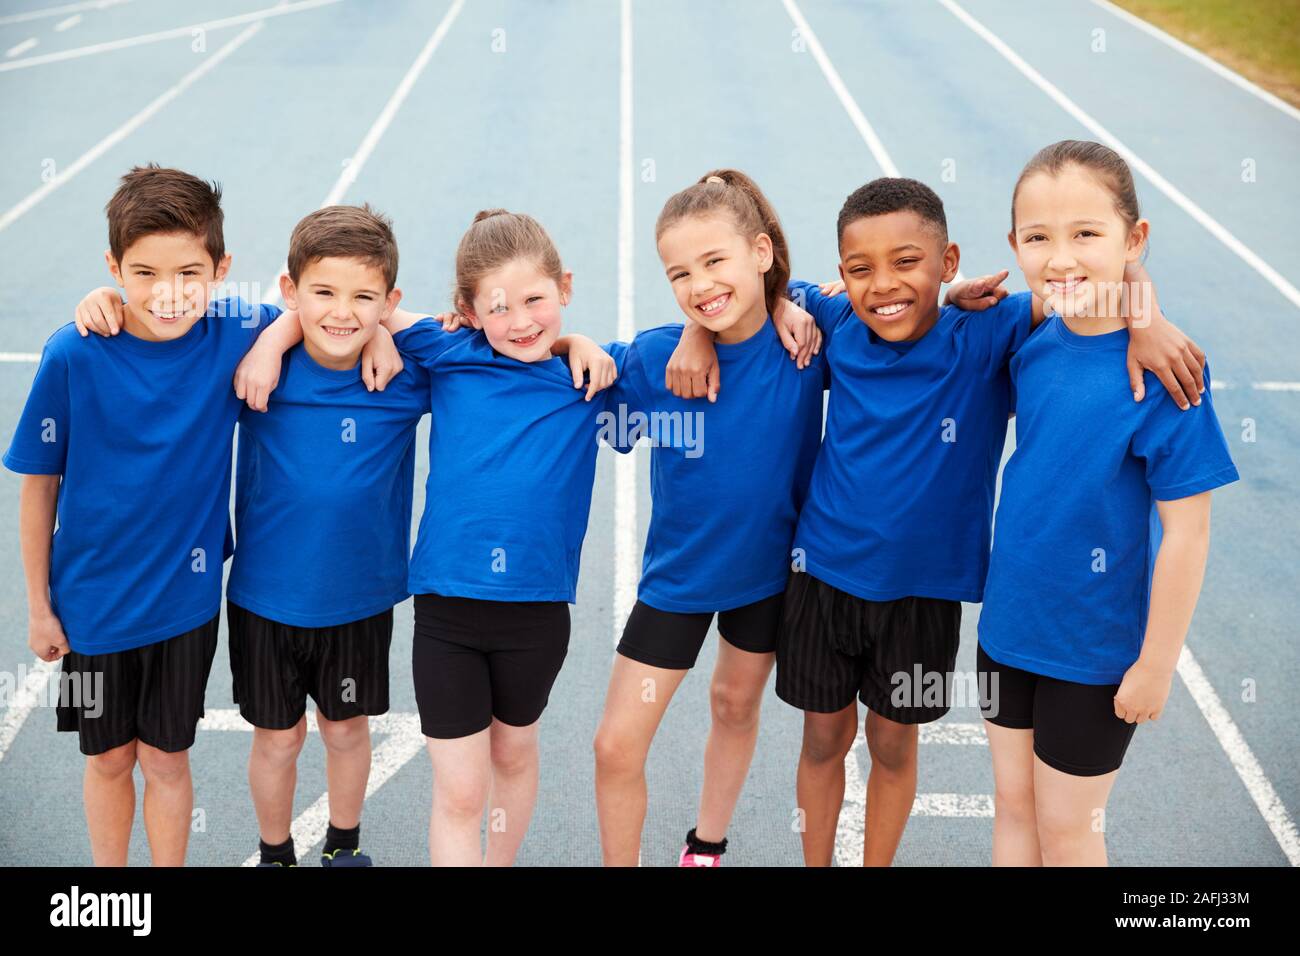 Portrait Of Children In Athletics Team On Track On Sports Day Stock Photo